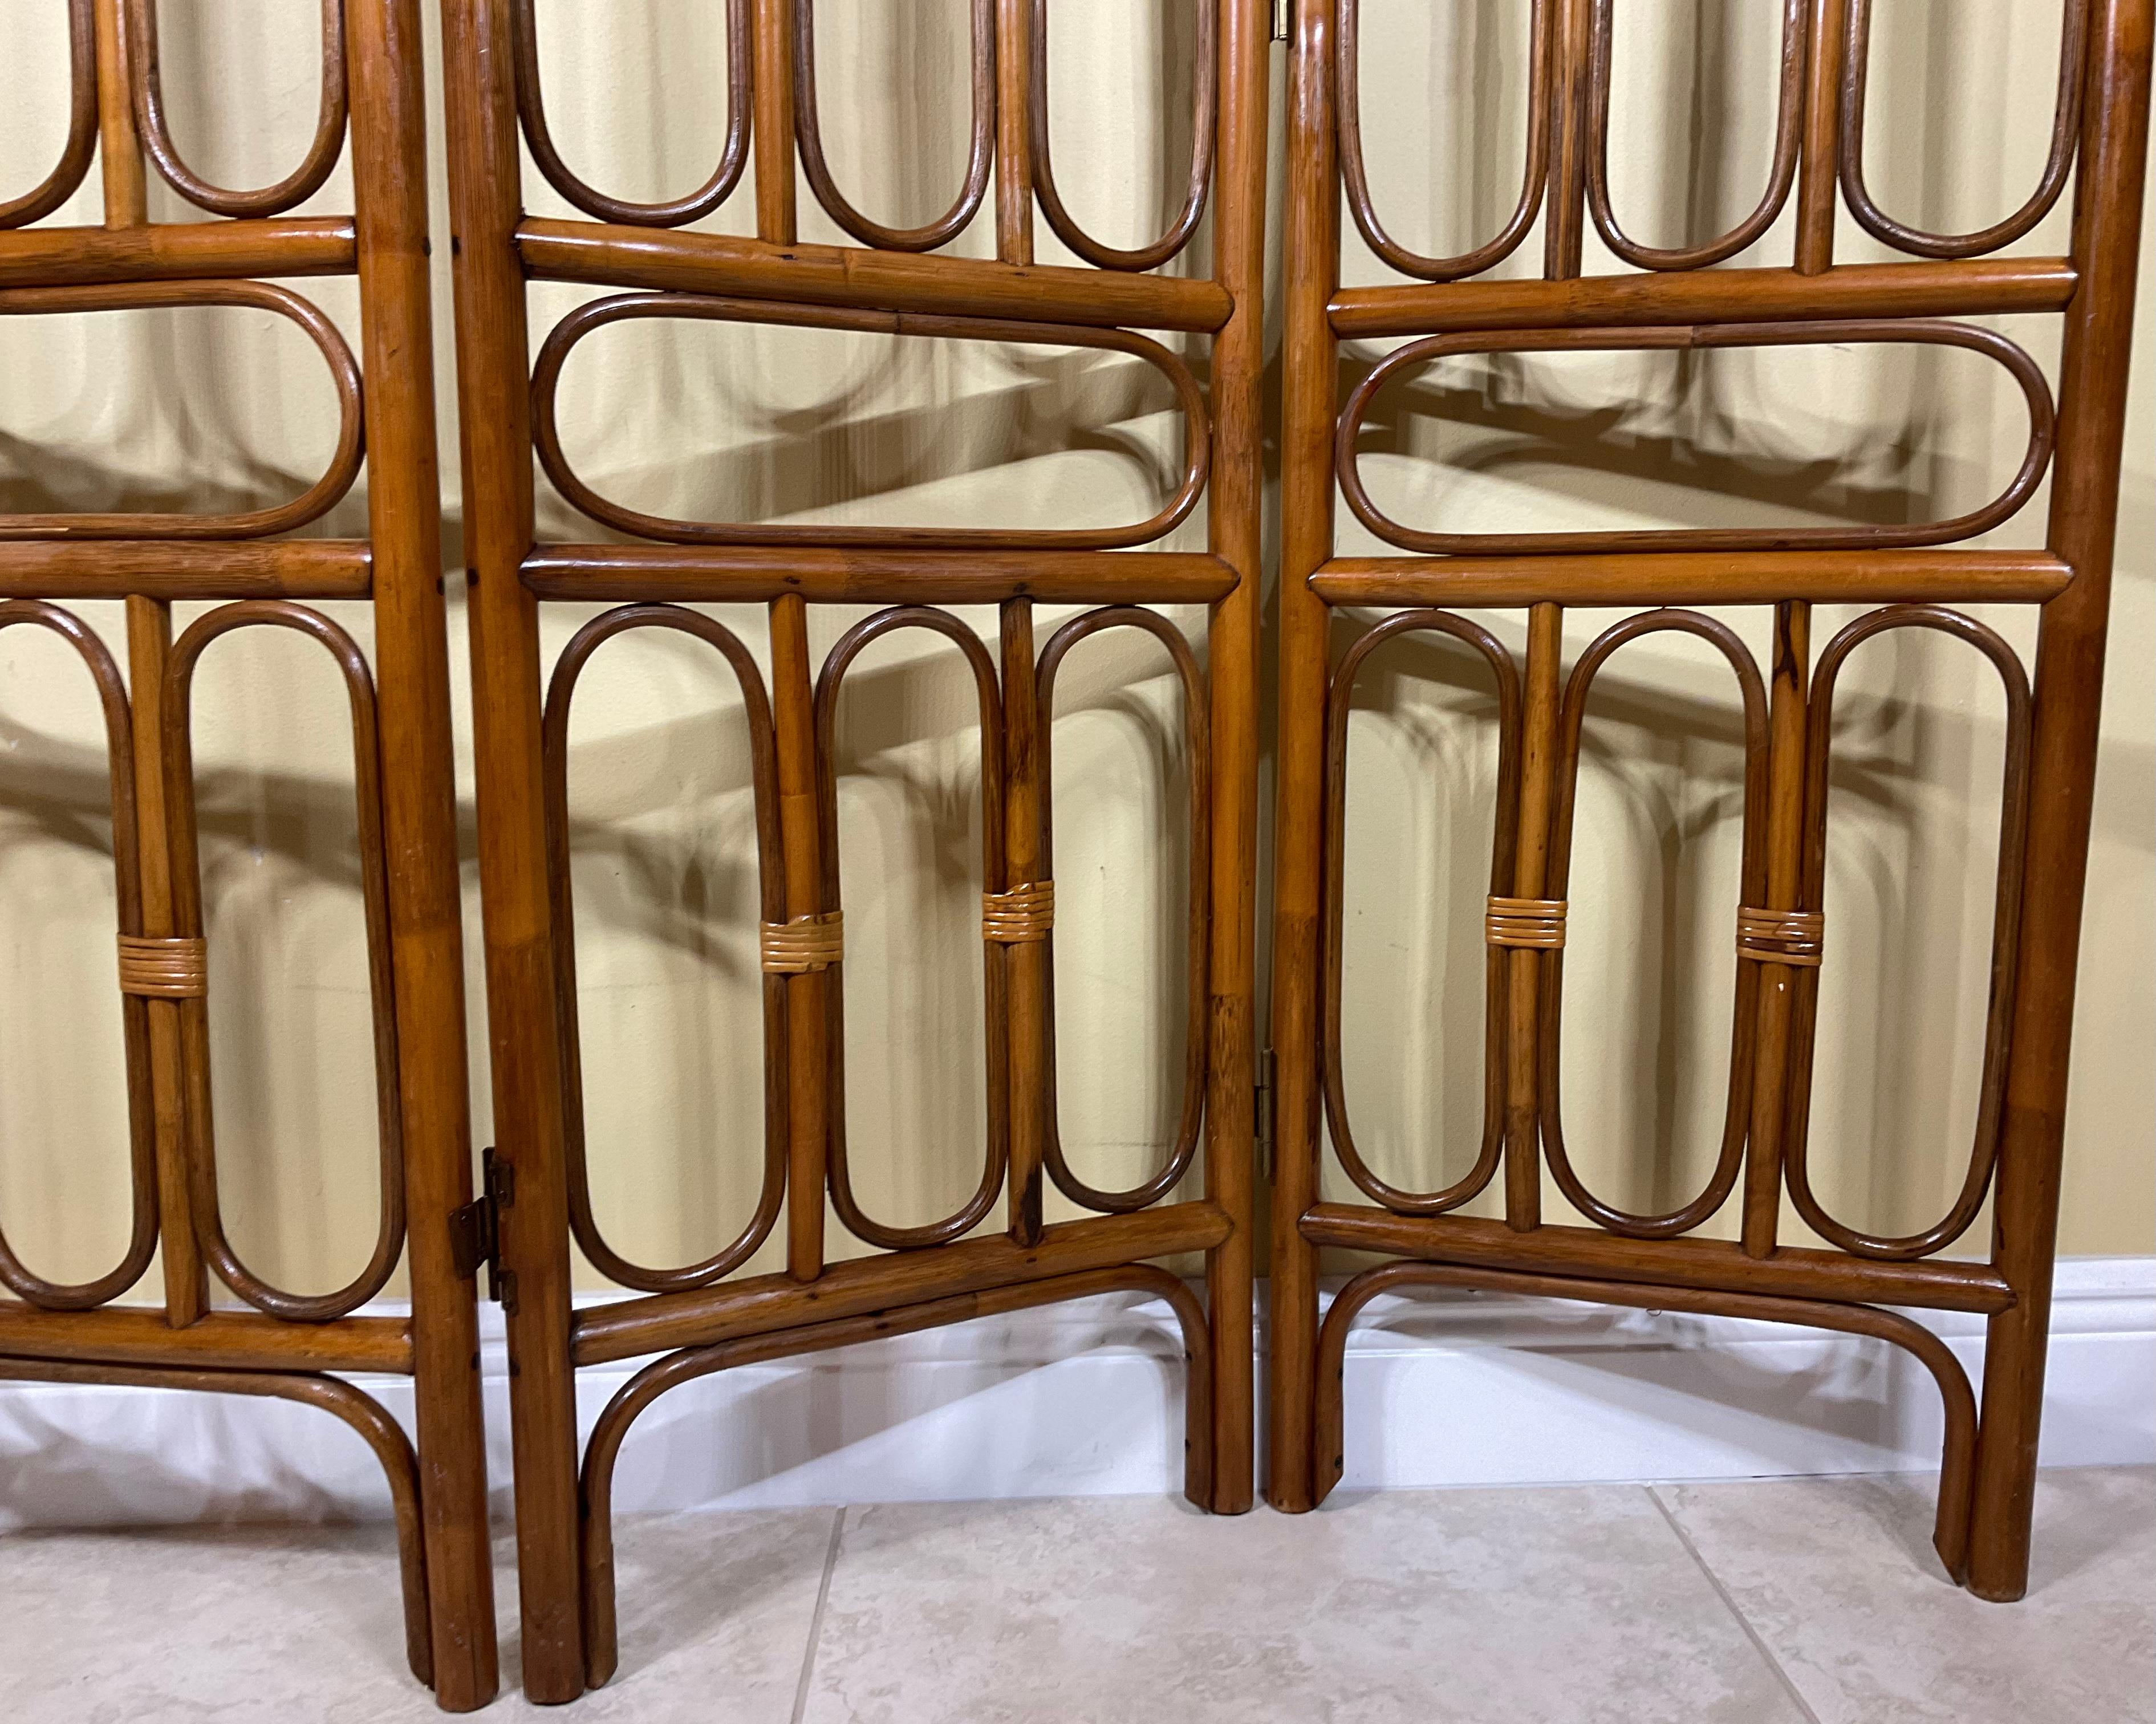 Vintage Three-Panel Bamboo Screen For Sale 2